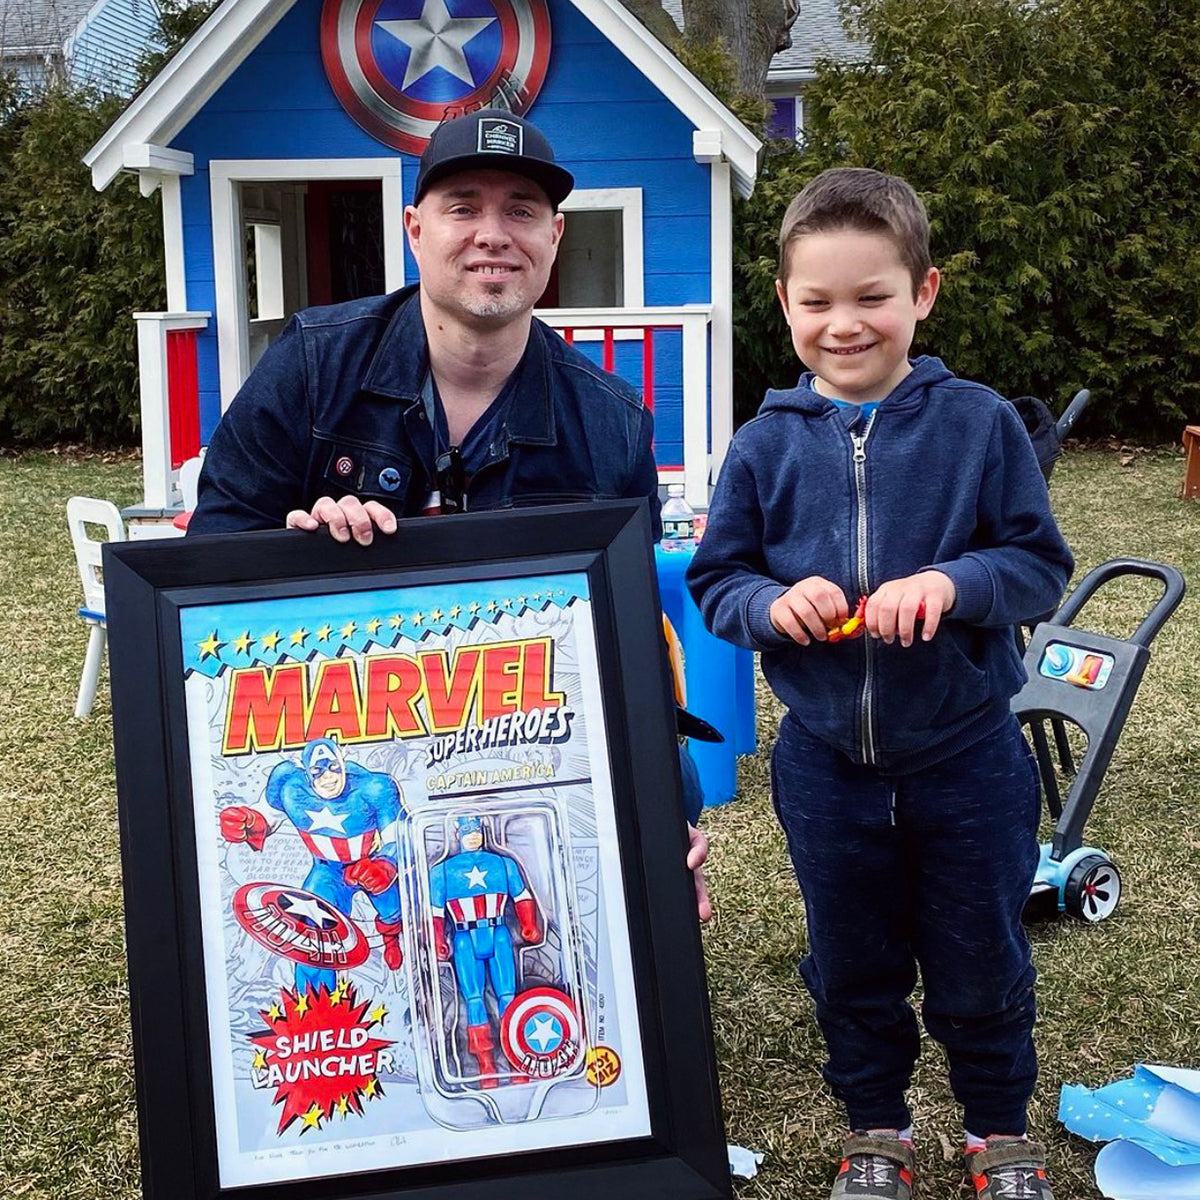 Andy Houle x Noah x Captain America for Make-A-Wish